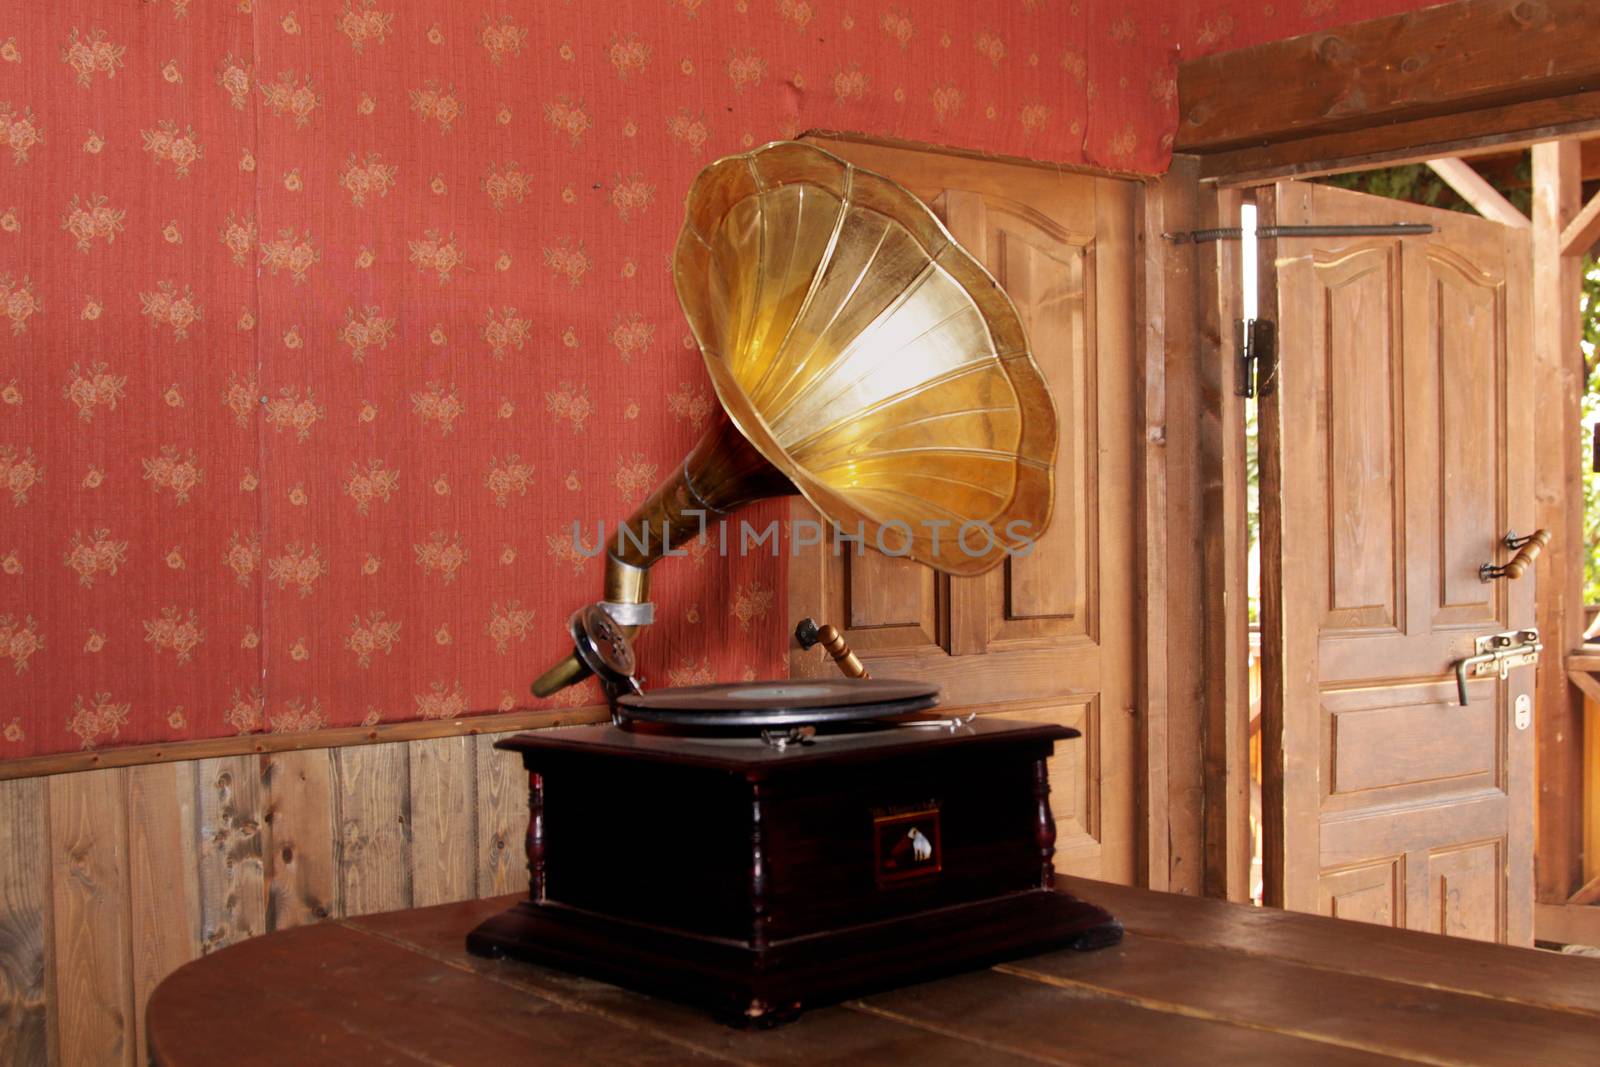 An antique gramophone in the interior